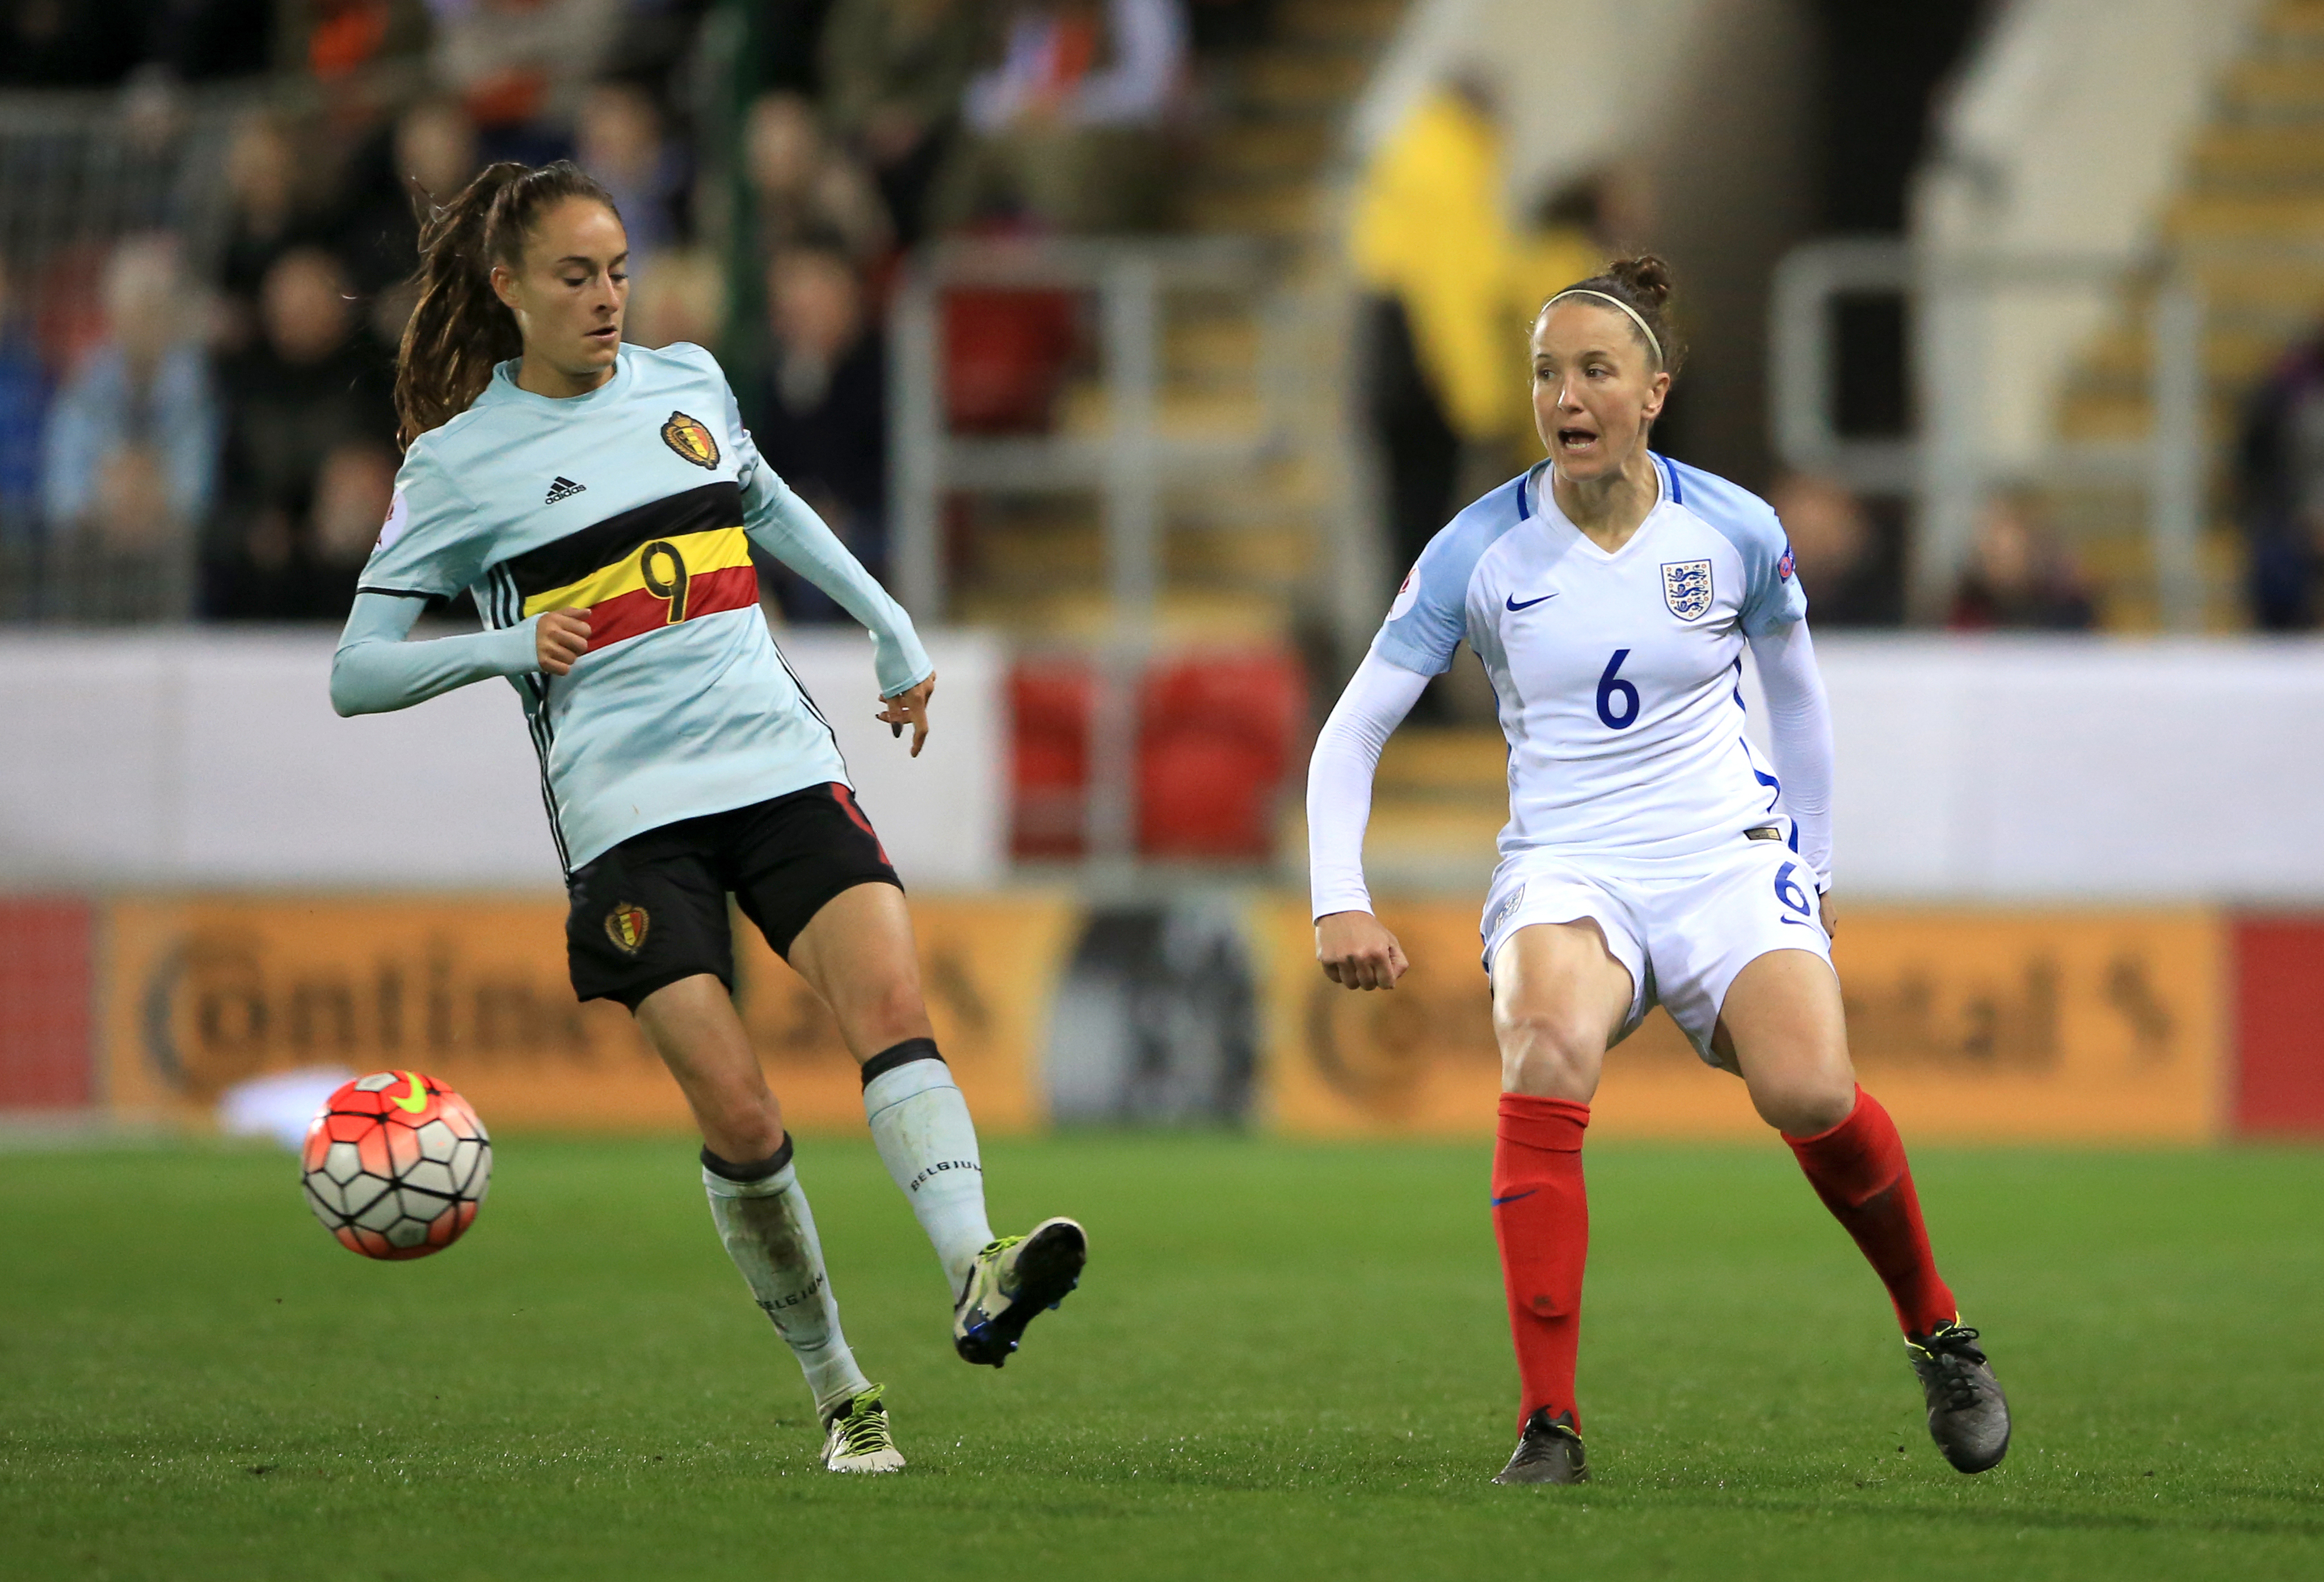 Casey stoney in action during a uefa 2017 qualifier